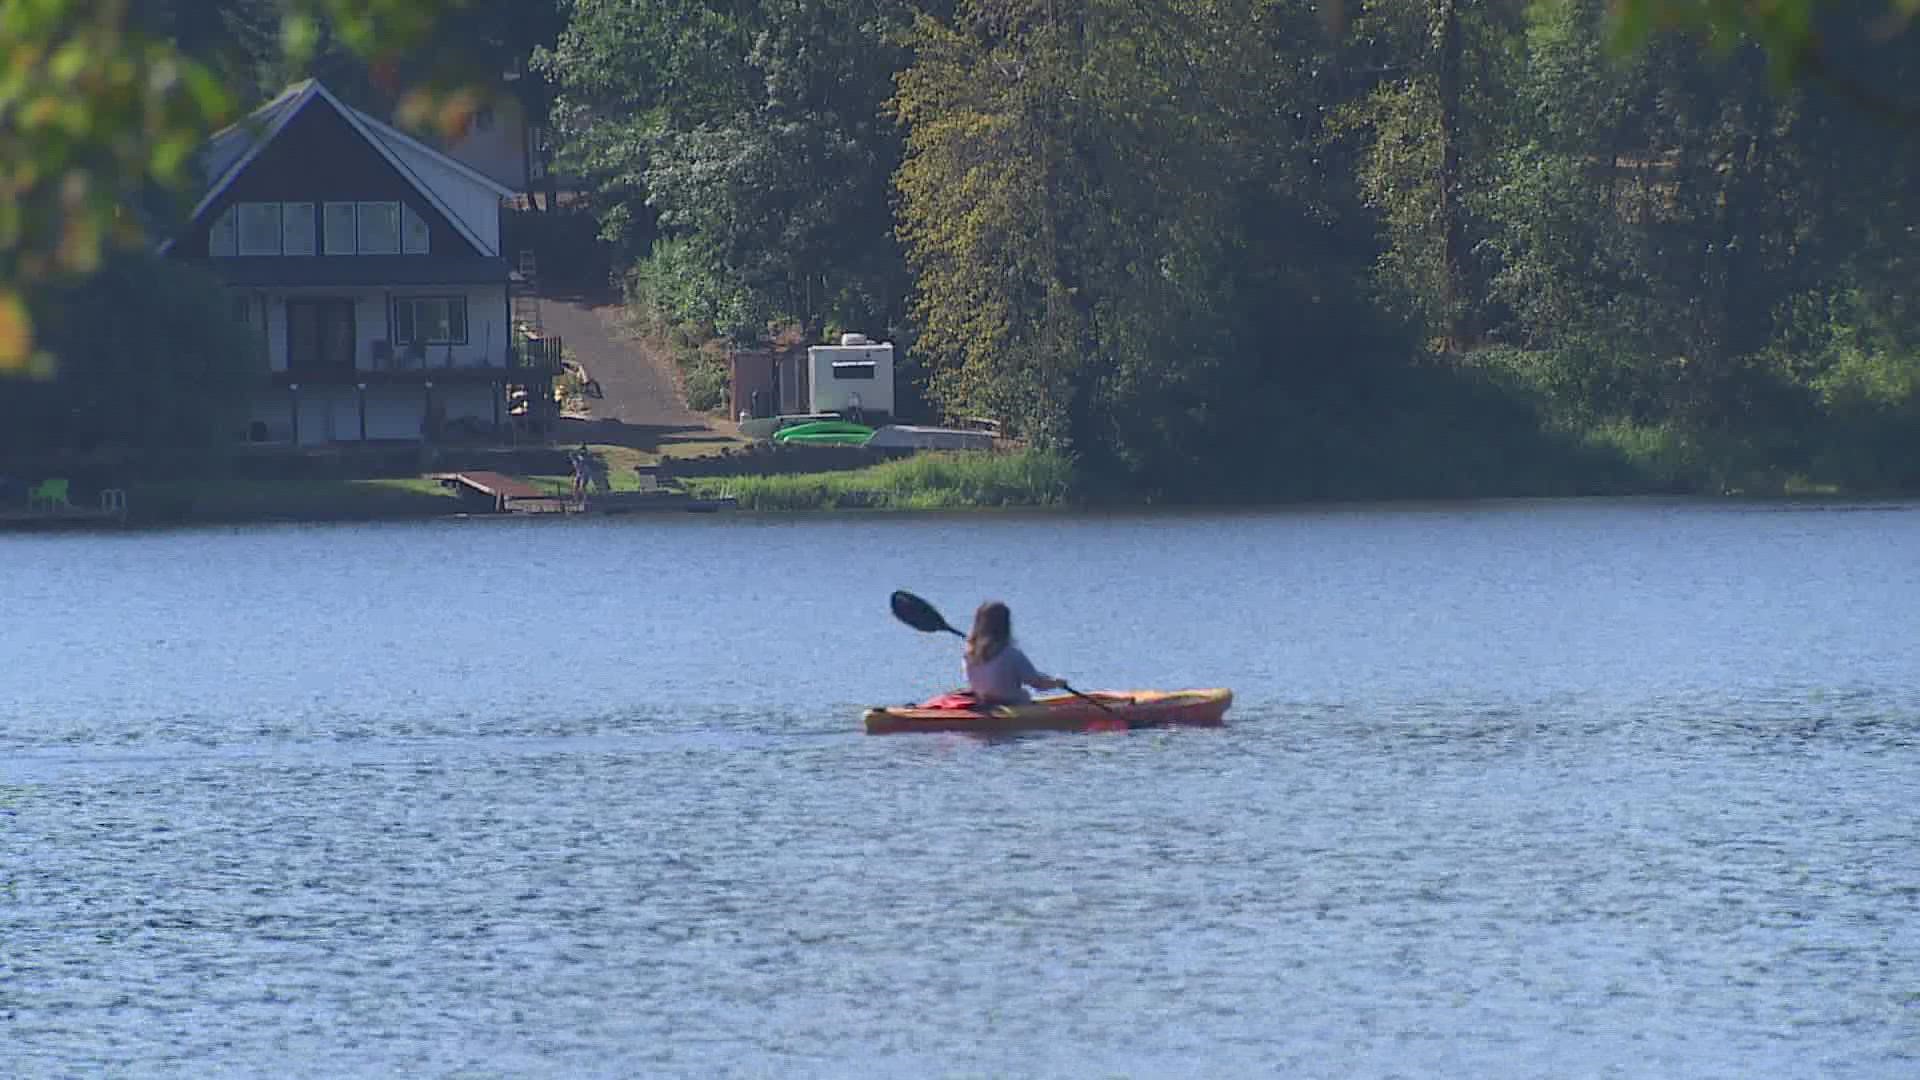 The homeowners want to give the county funding, and the authority to clean weeds, pollution and algae from the lake they call home.